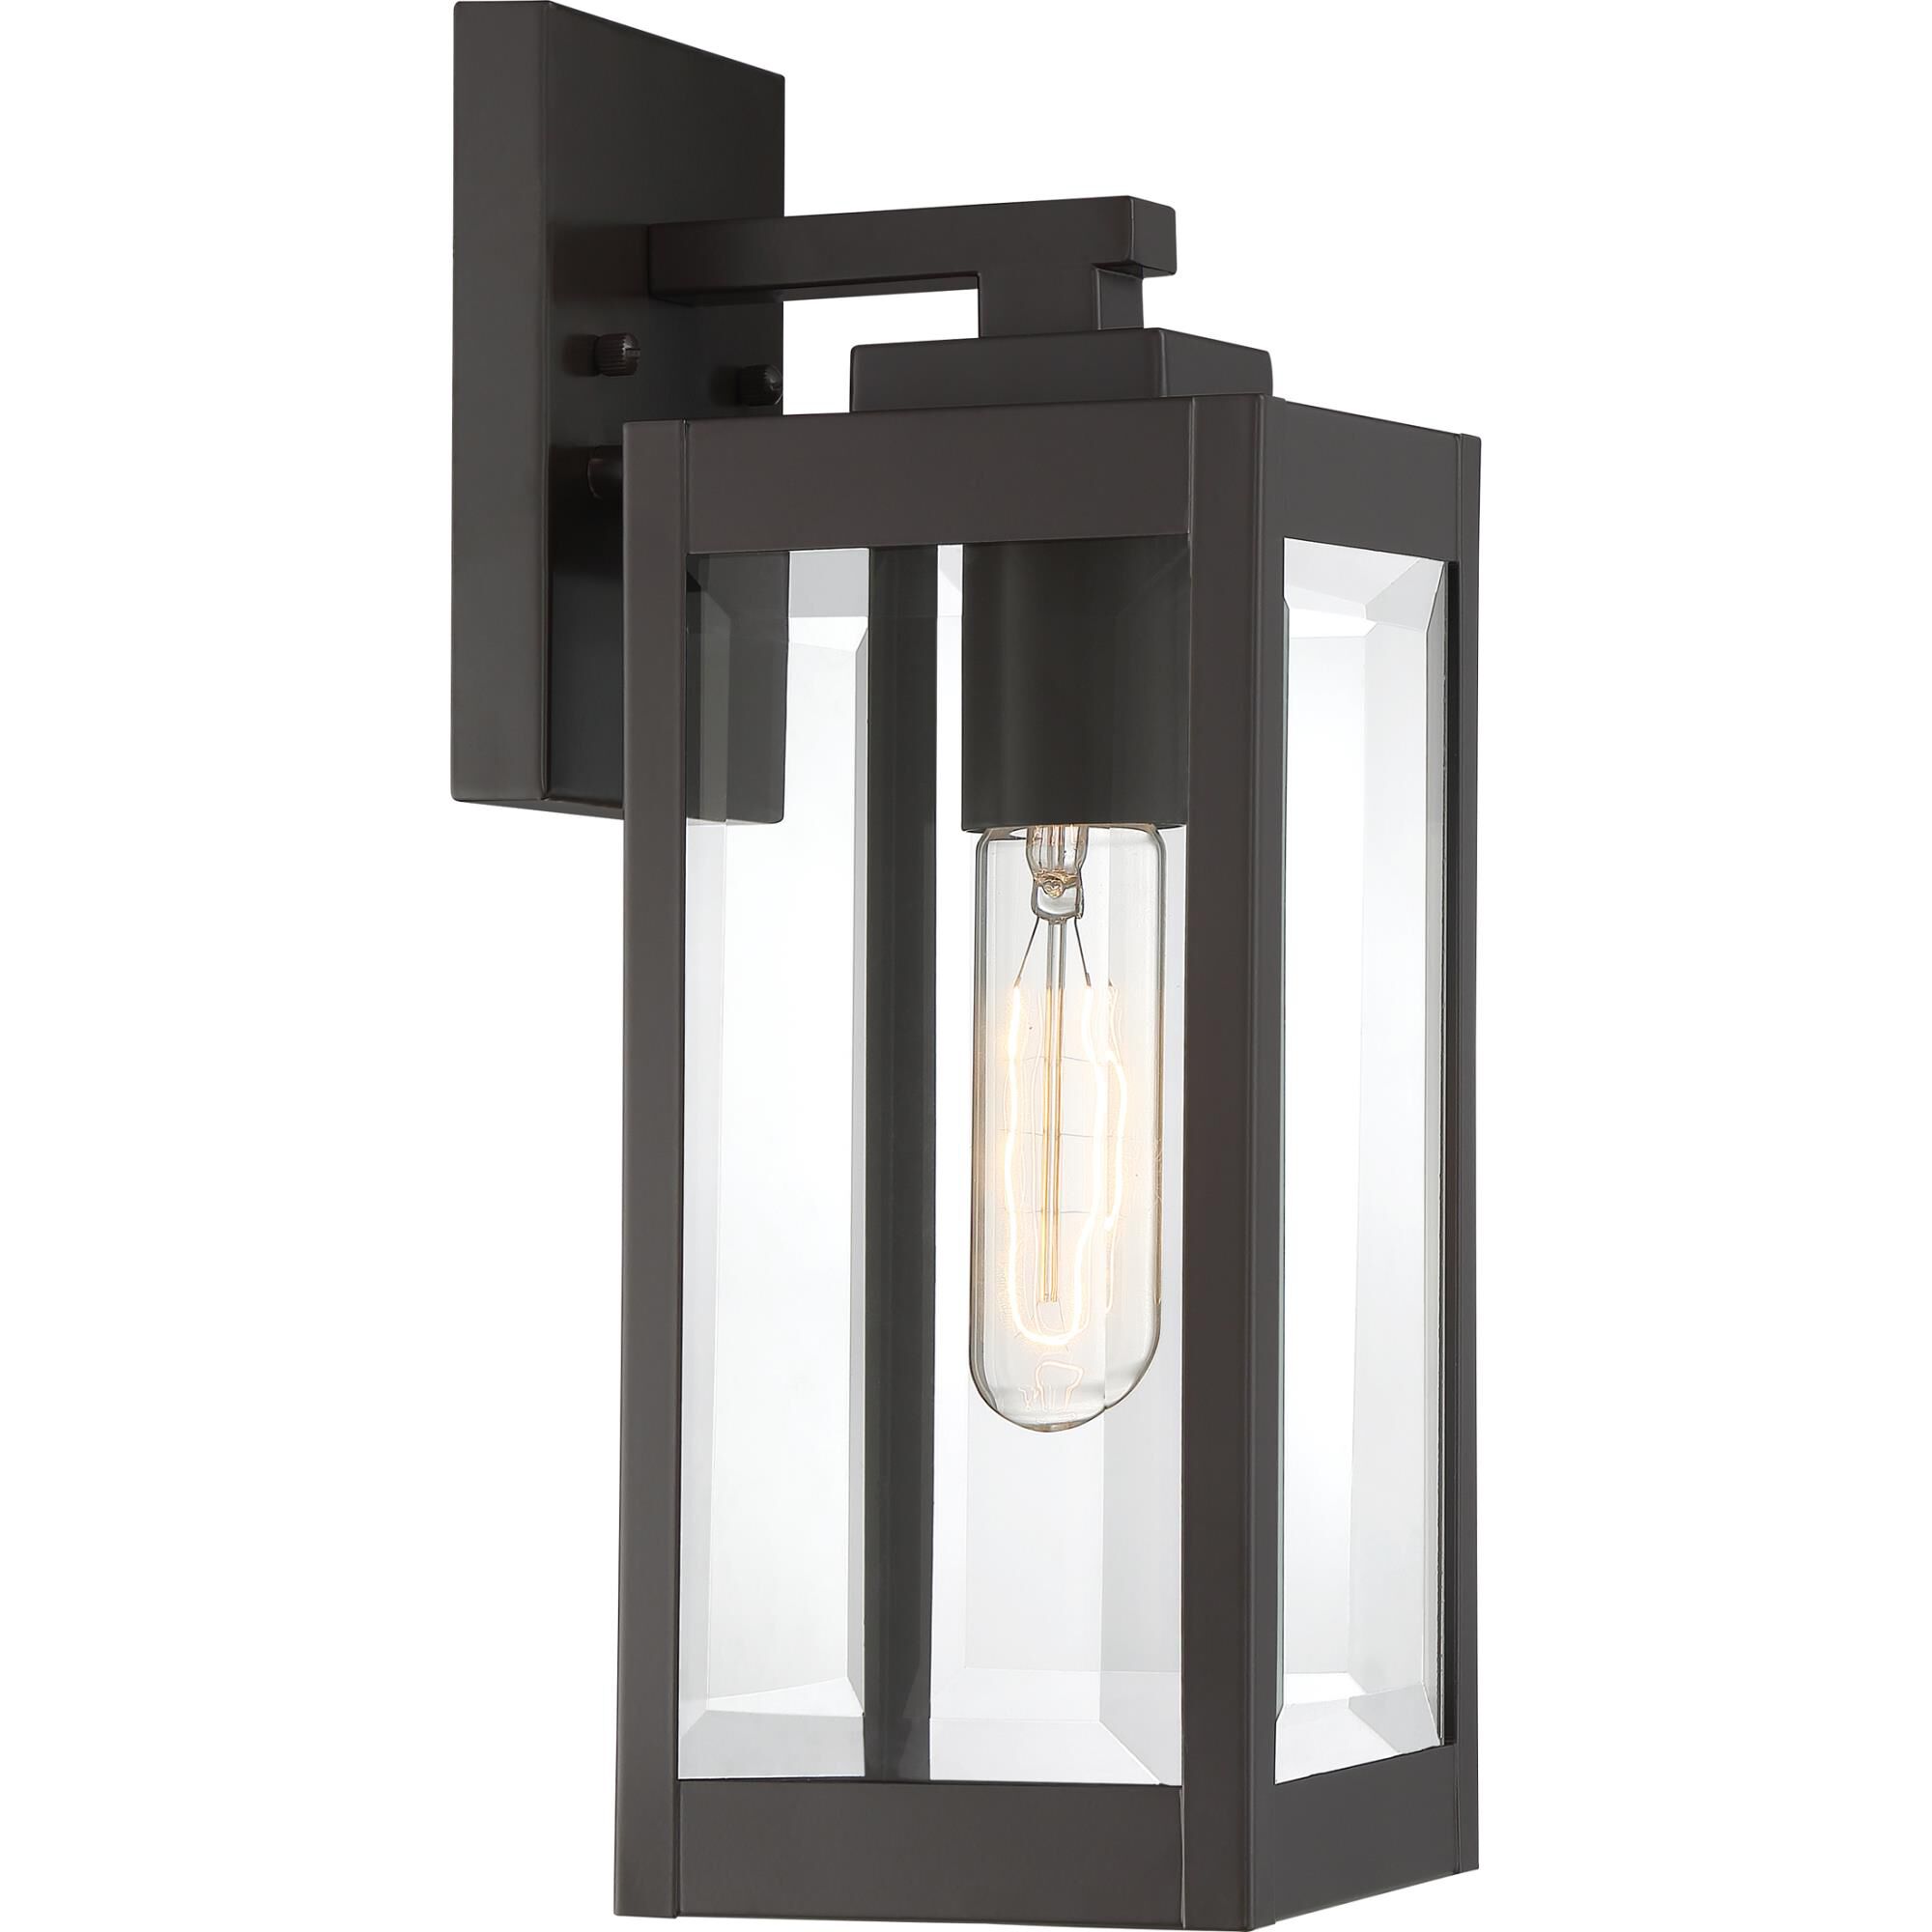 Photos - Chandelier / Lamp Quoizel Westover 14 Inch Tall Outdoor Wall Light Westover - WVR8405WT - Tr 